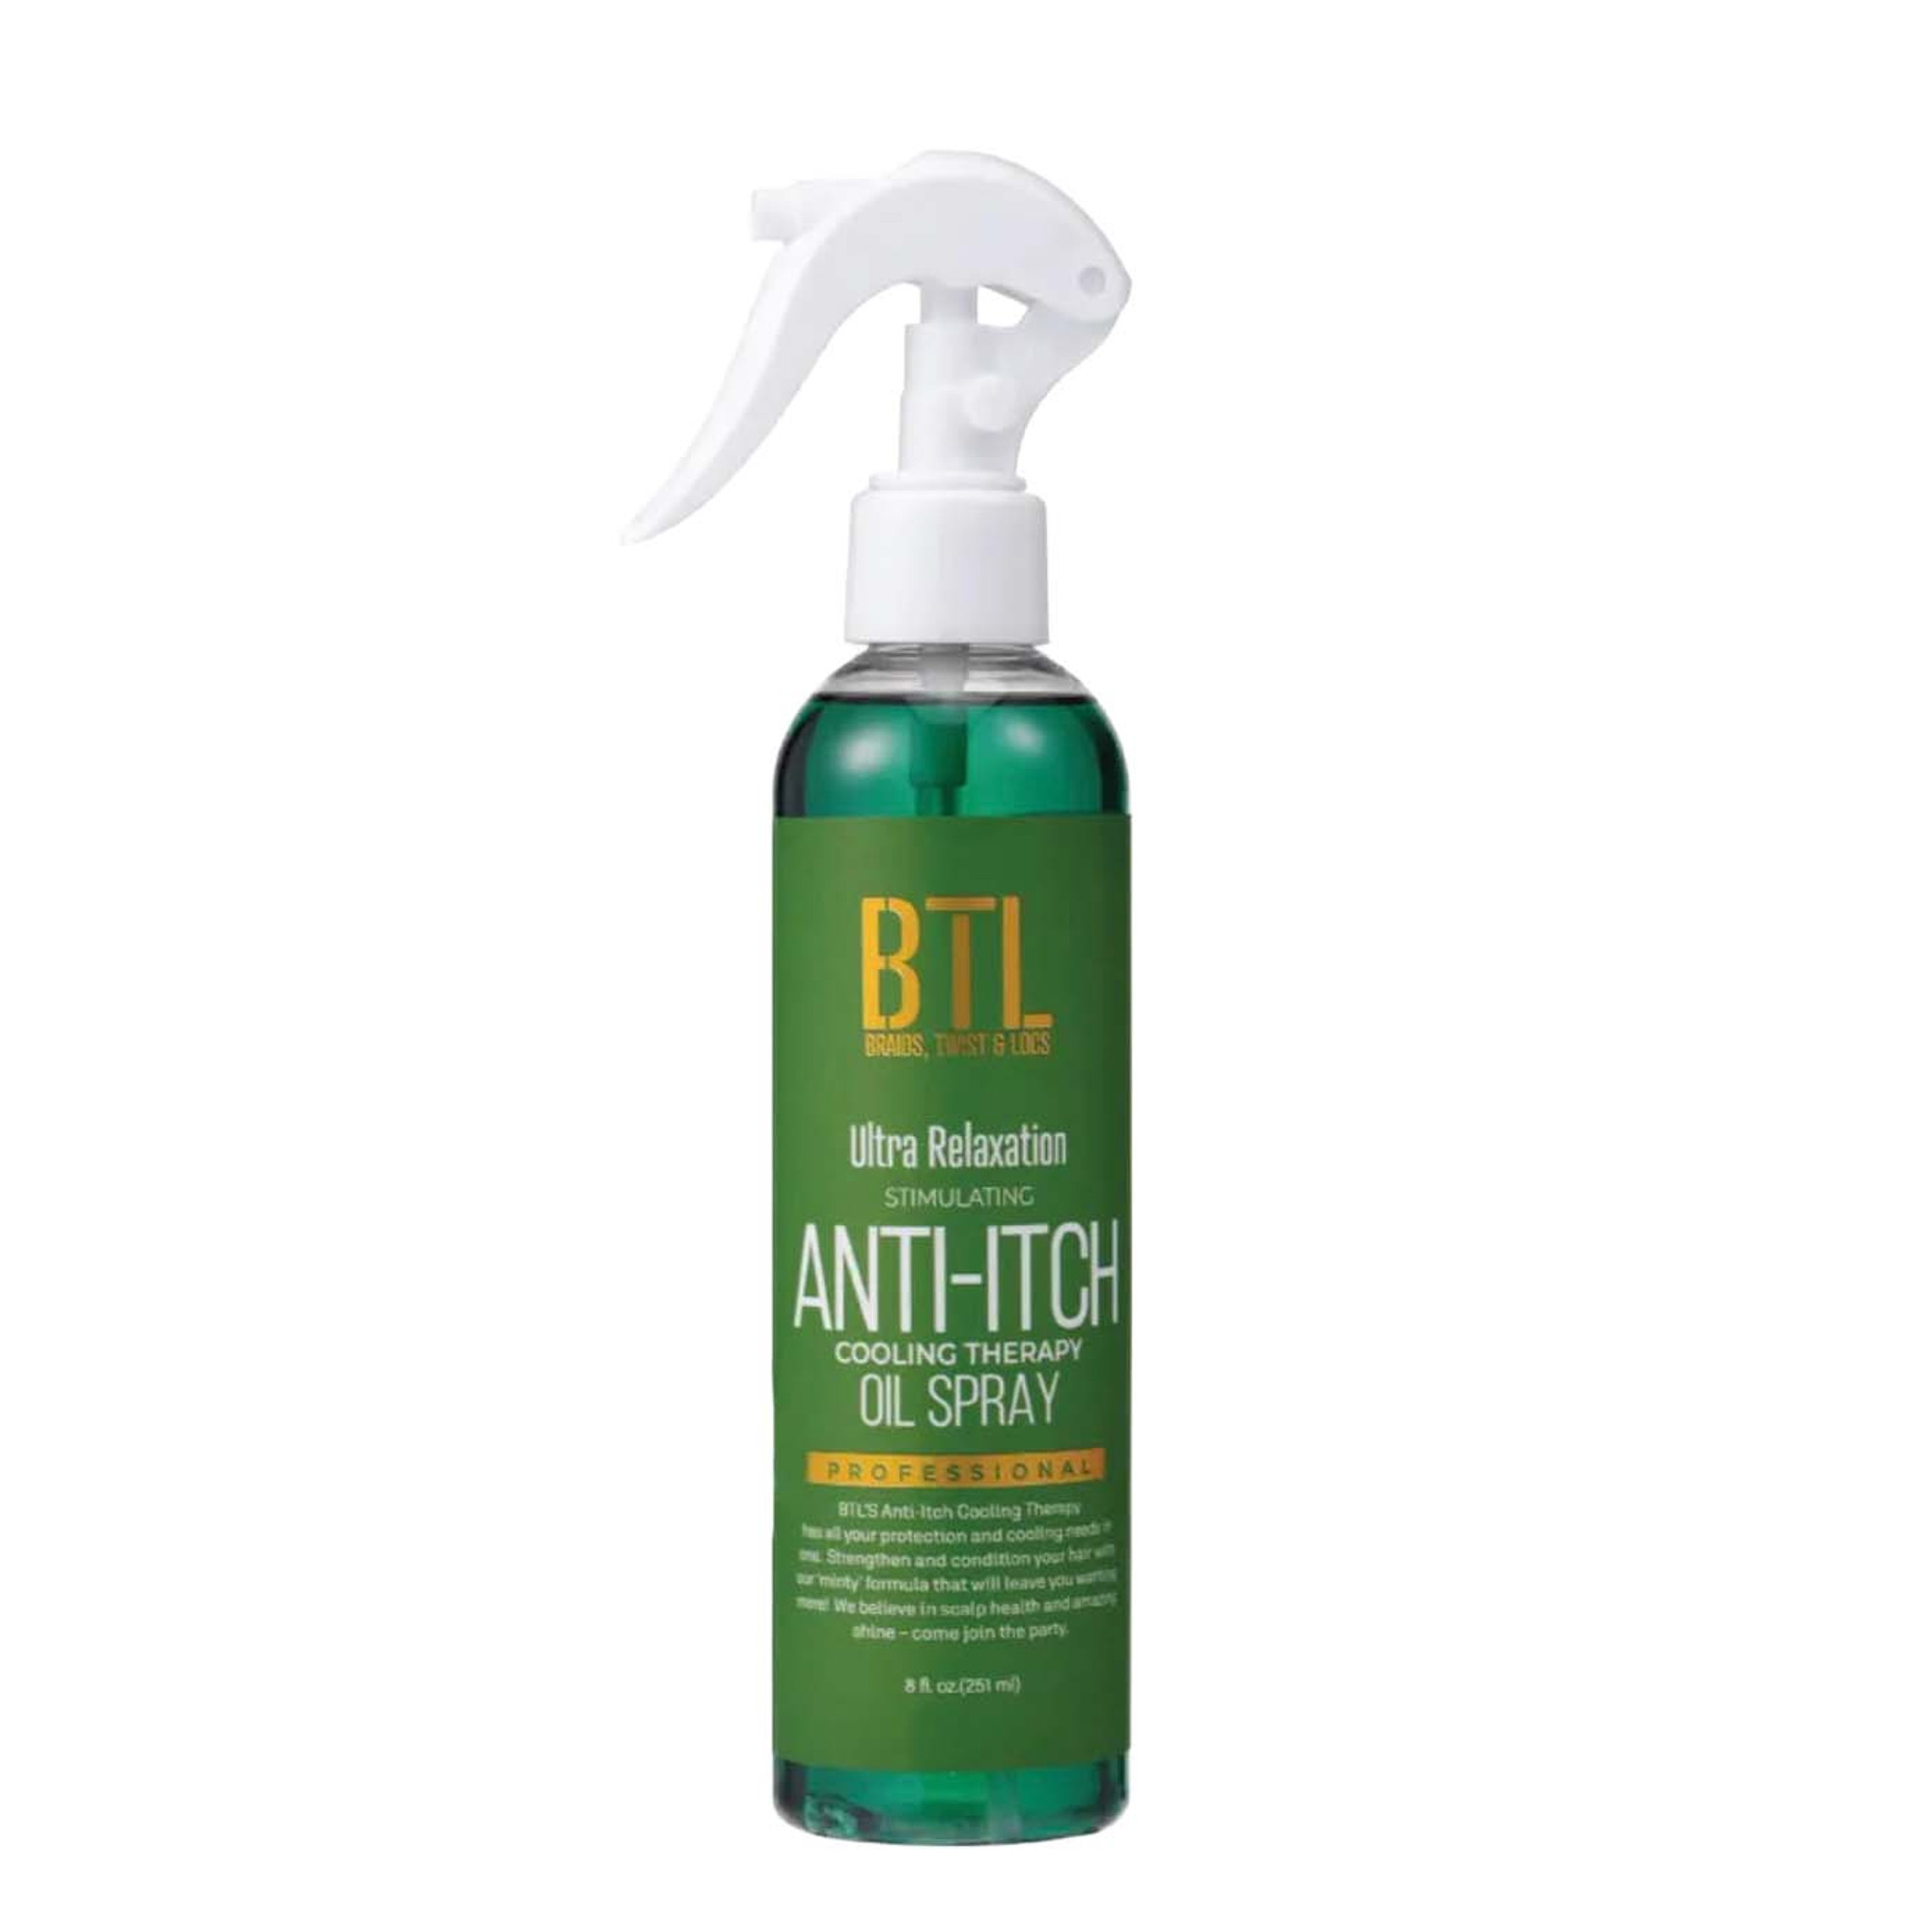 BTL Professional Ultra Relaxation Stimulating Anti-Itch Cooling Therapy Oil Spray